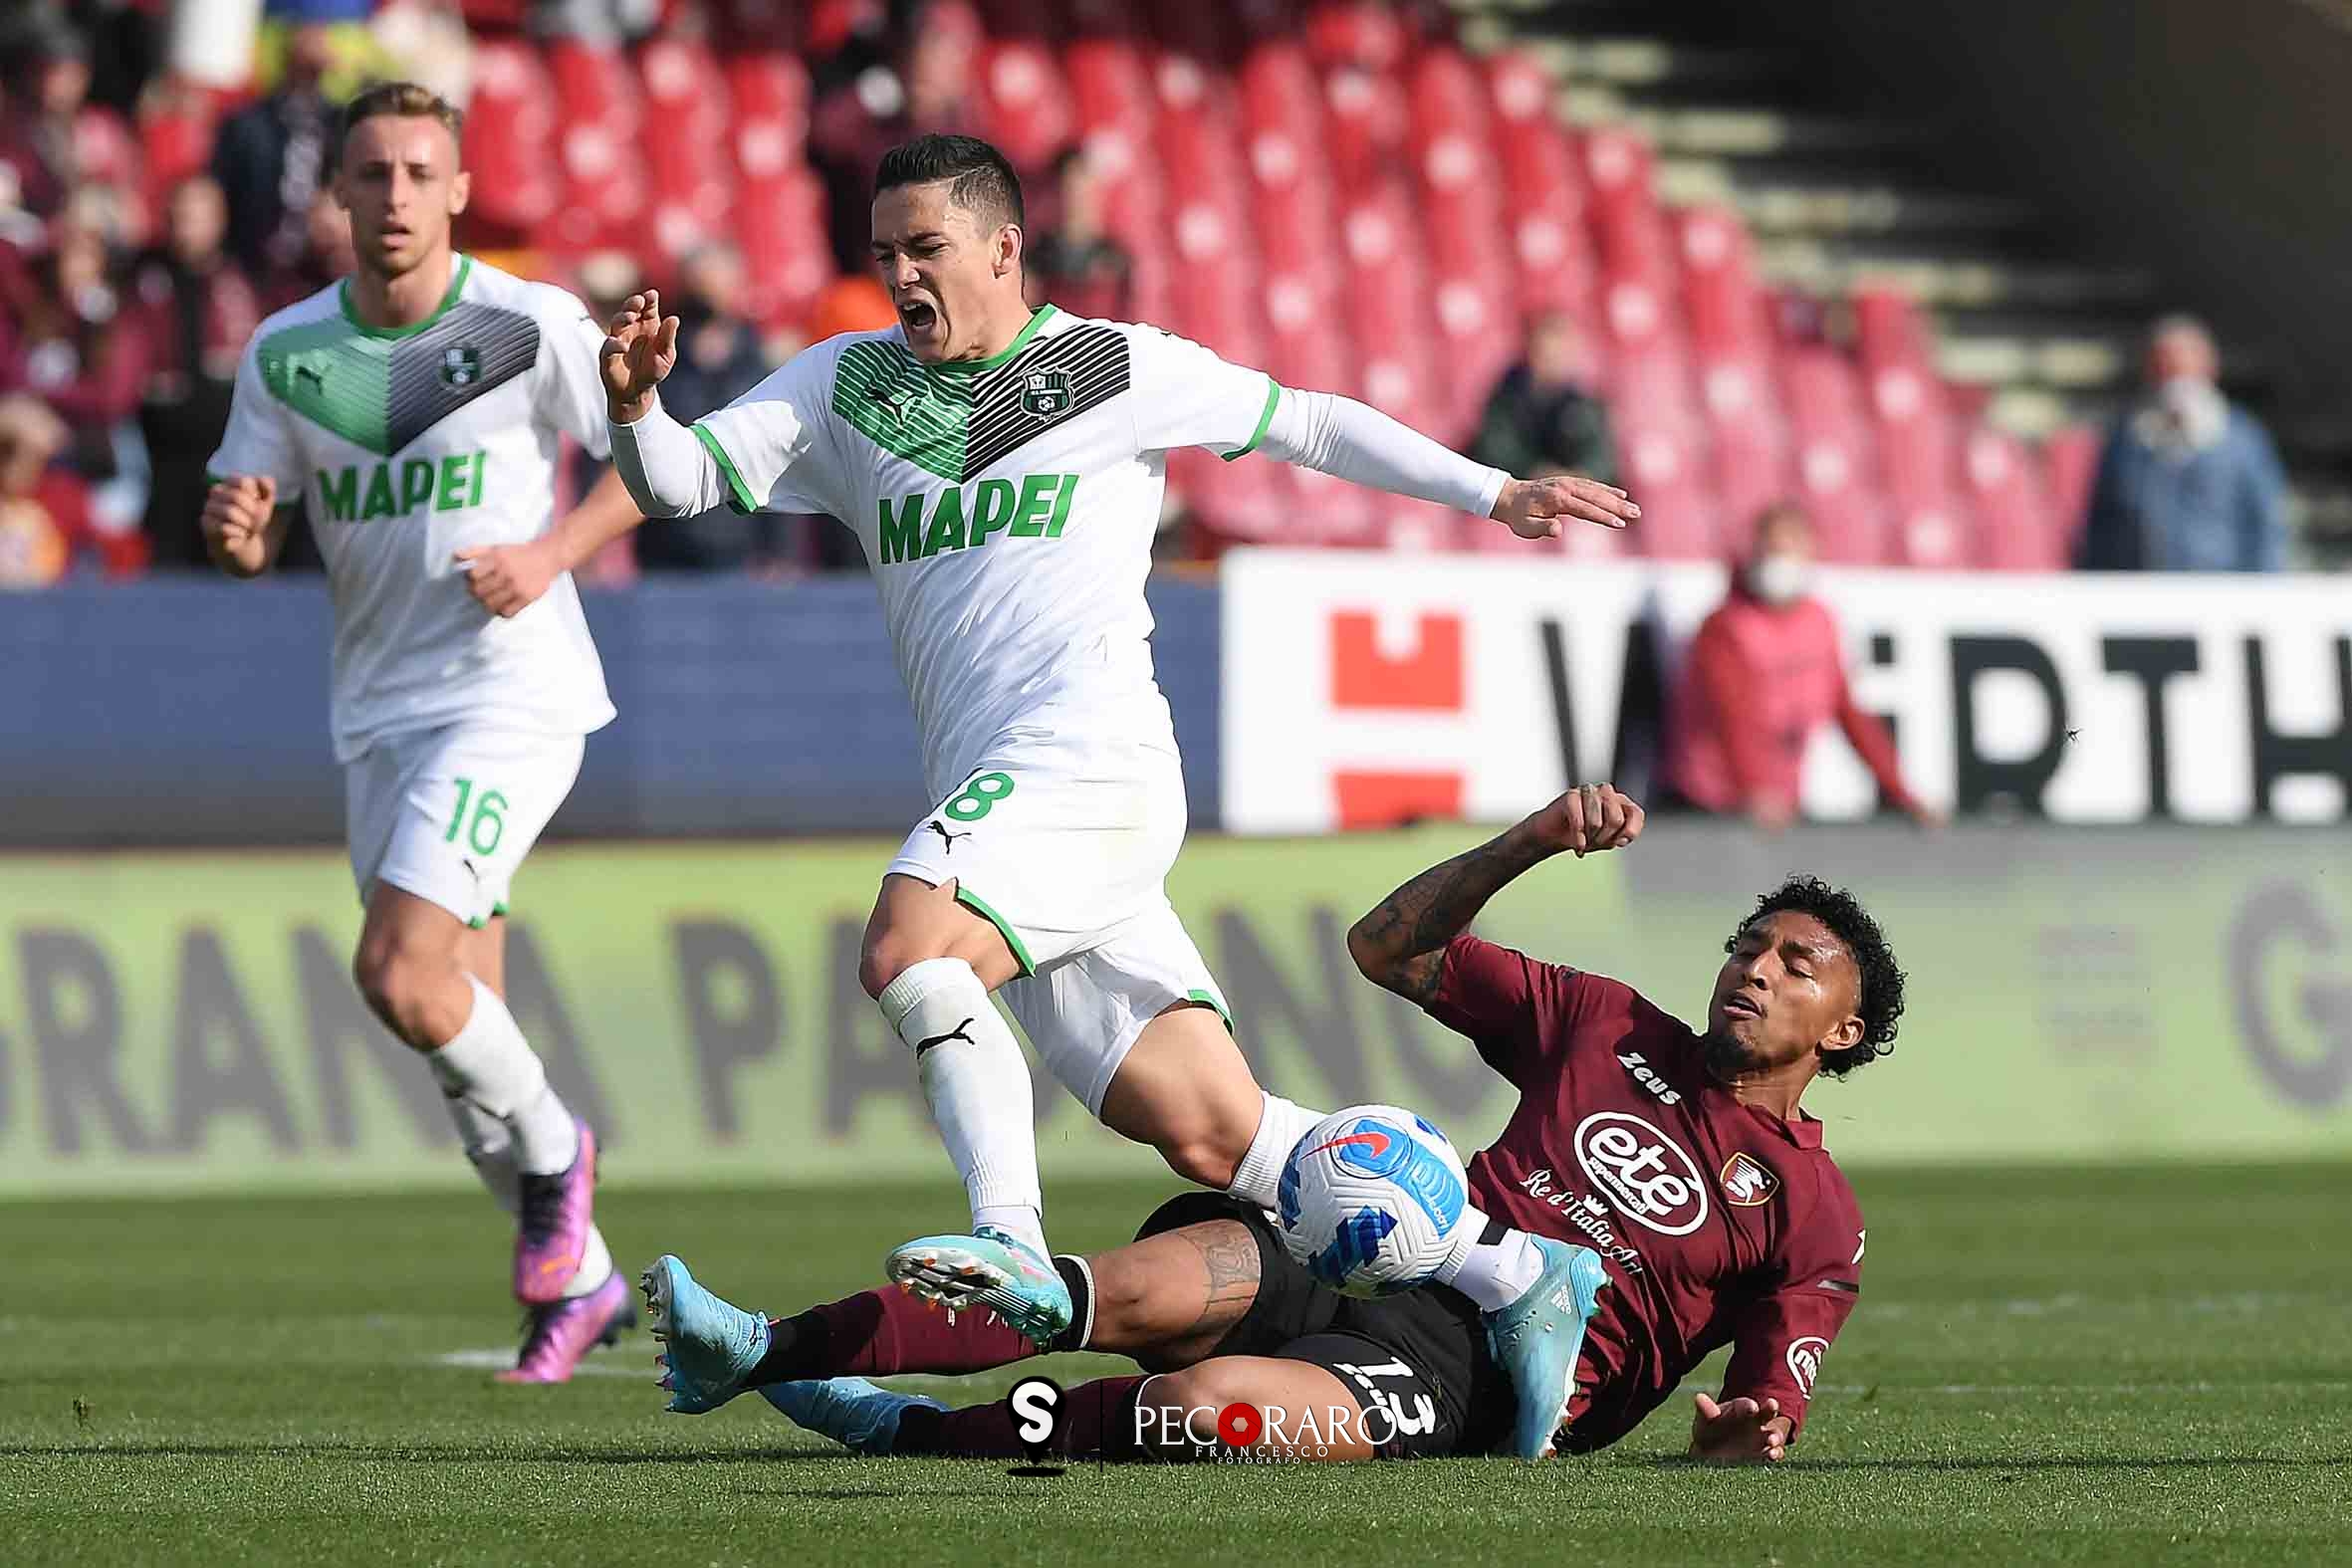 Salernitana registered their eighth straight winless result today against Sassuolo as they drew 2-2 at the Arechi Stadium in Salerno